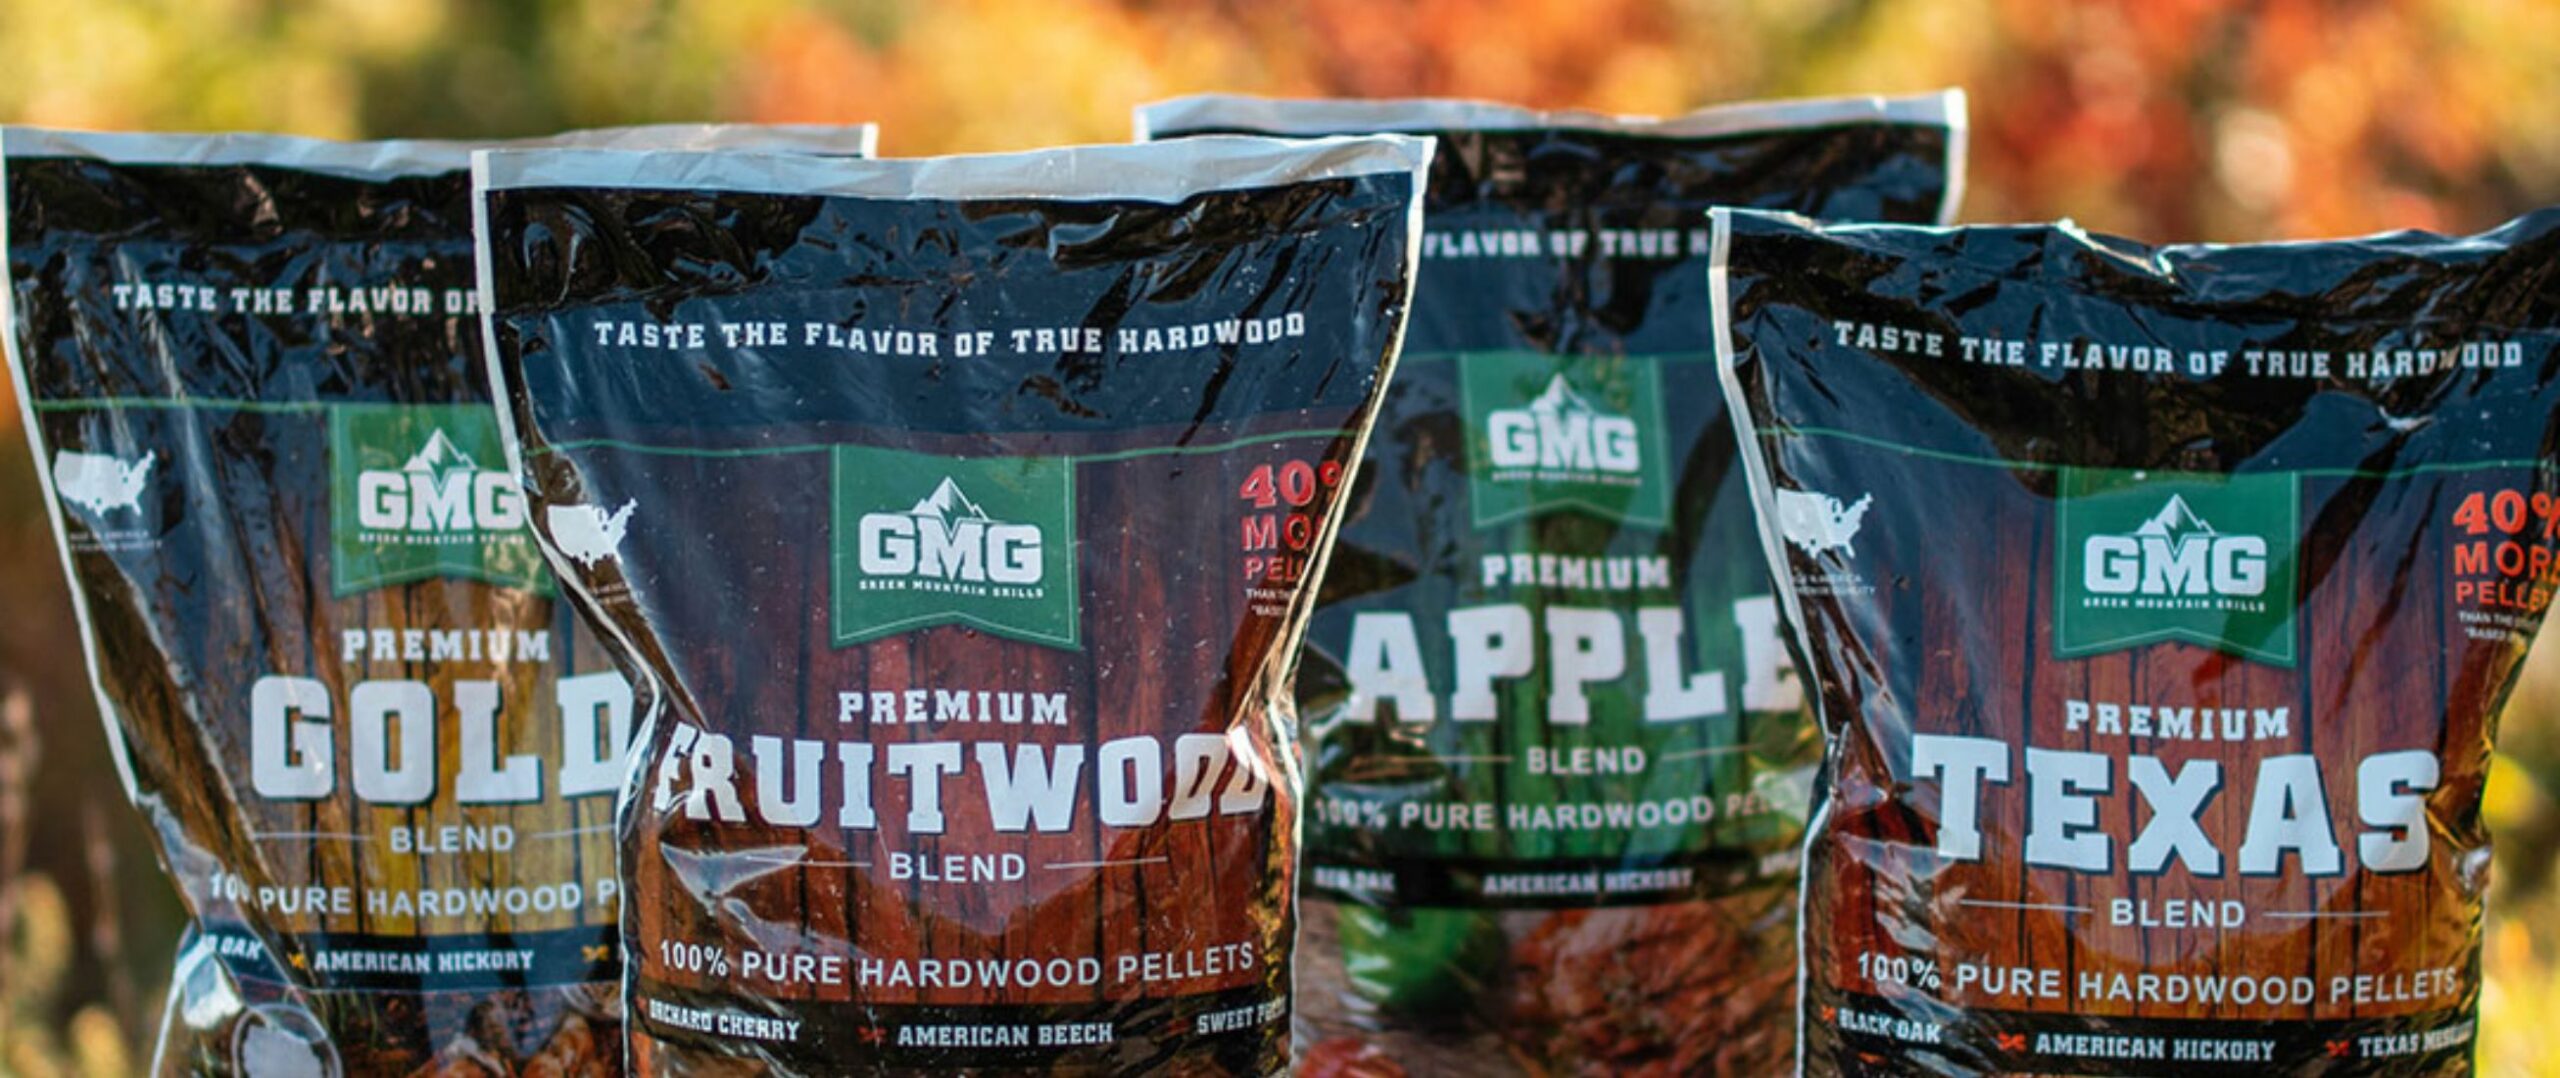 Taste The Difference Of Real Hardwood Flavor